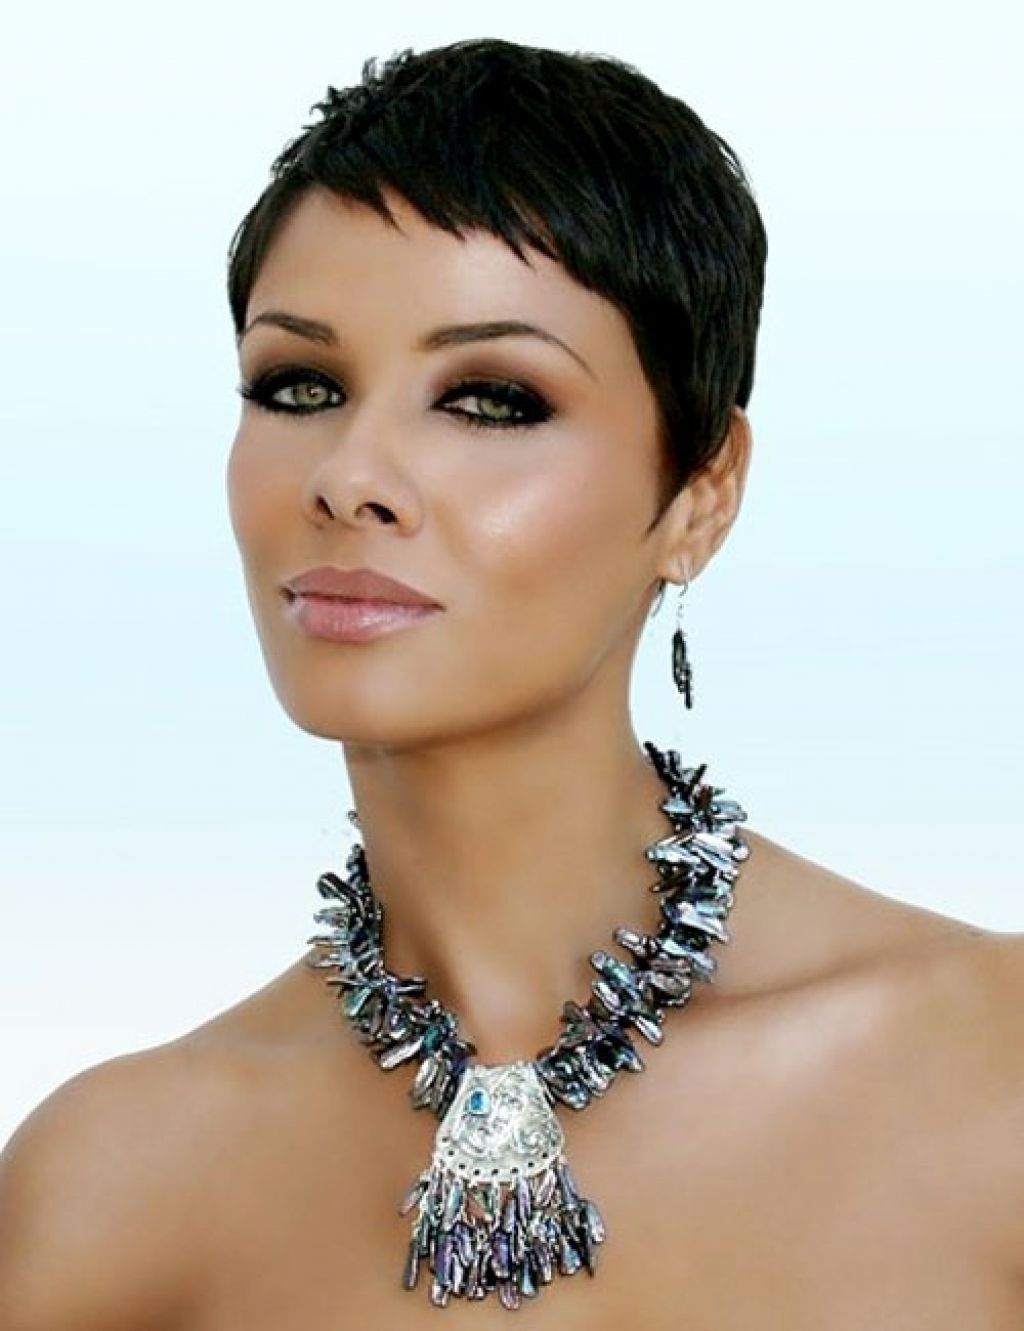 Short Pixie Cut Hairstyles Black Women Hairstyles Medium Hair Intended For Current Pixie Hairstyles For Black Hair (View 9 of 15)